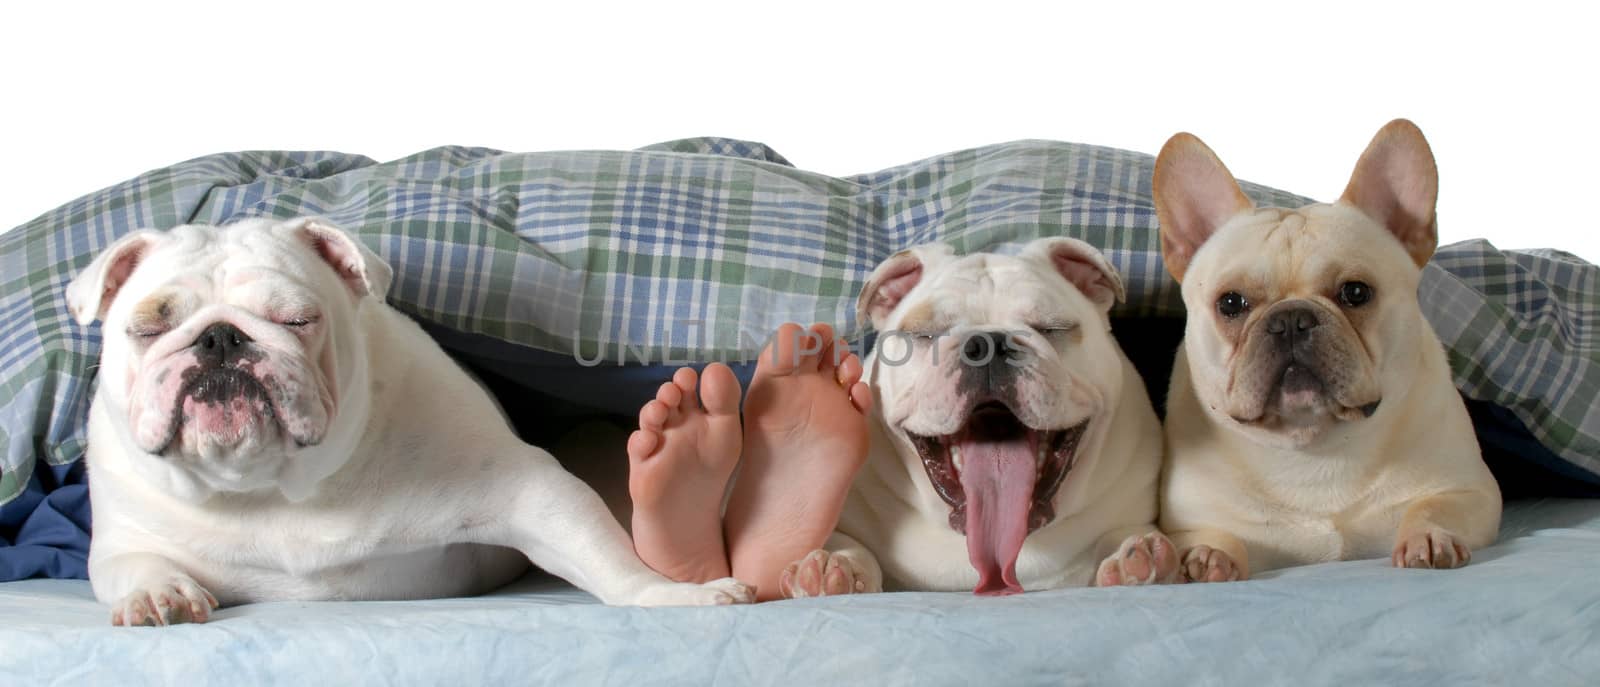 dogs in the bed - two english bulldogs and a french bulldog under the covers with human feet sticking out isolated on white background